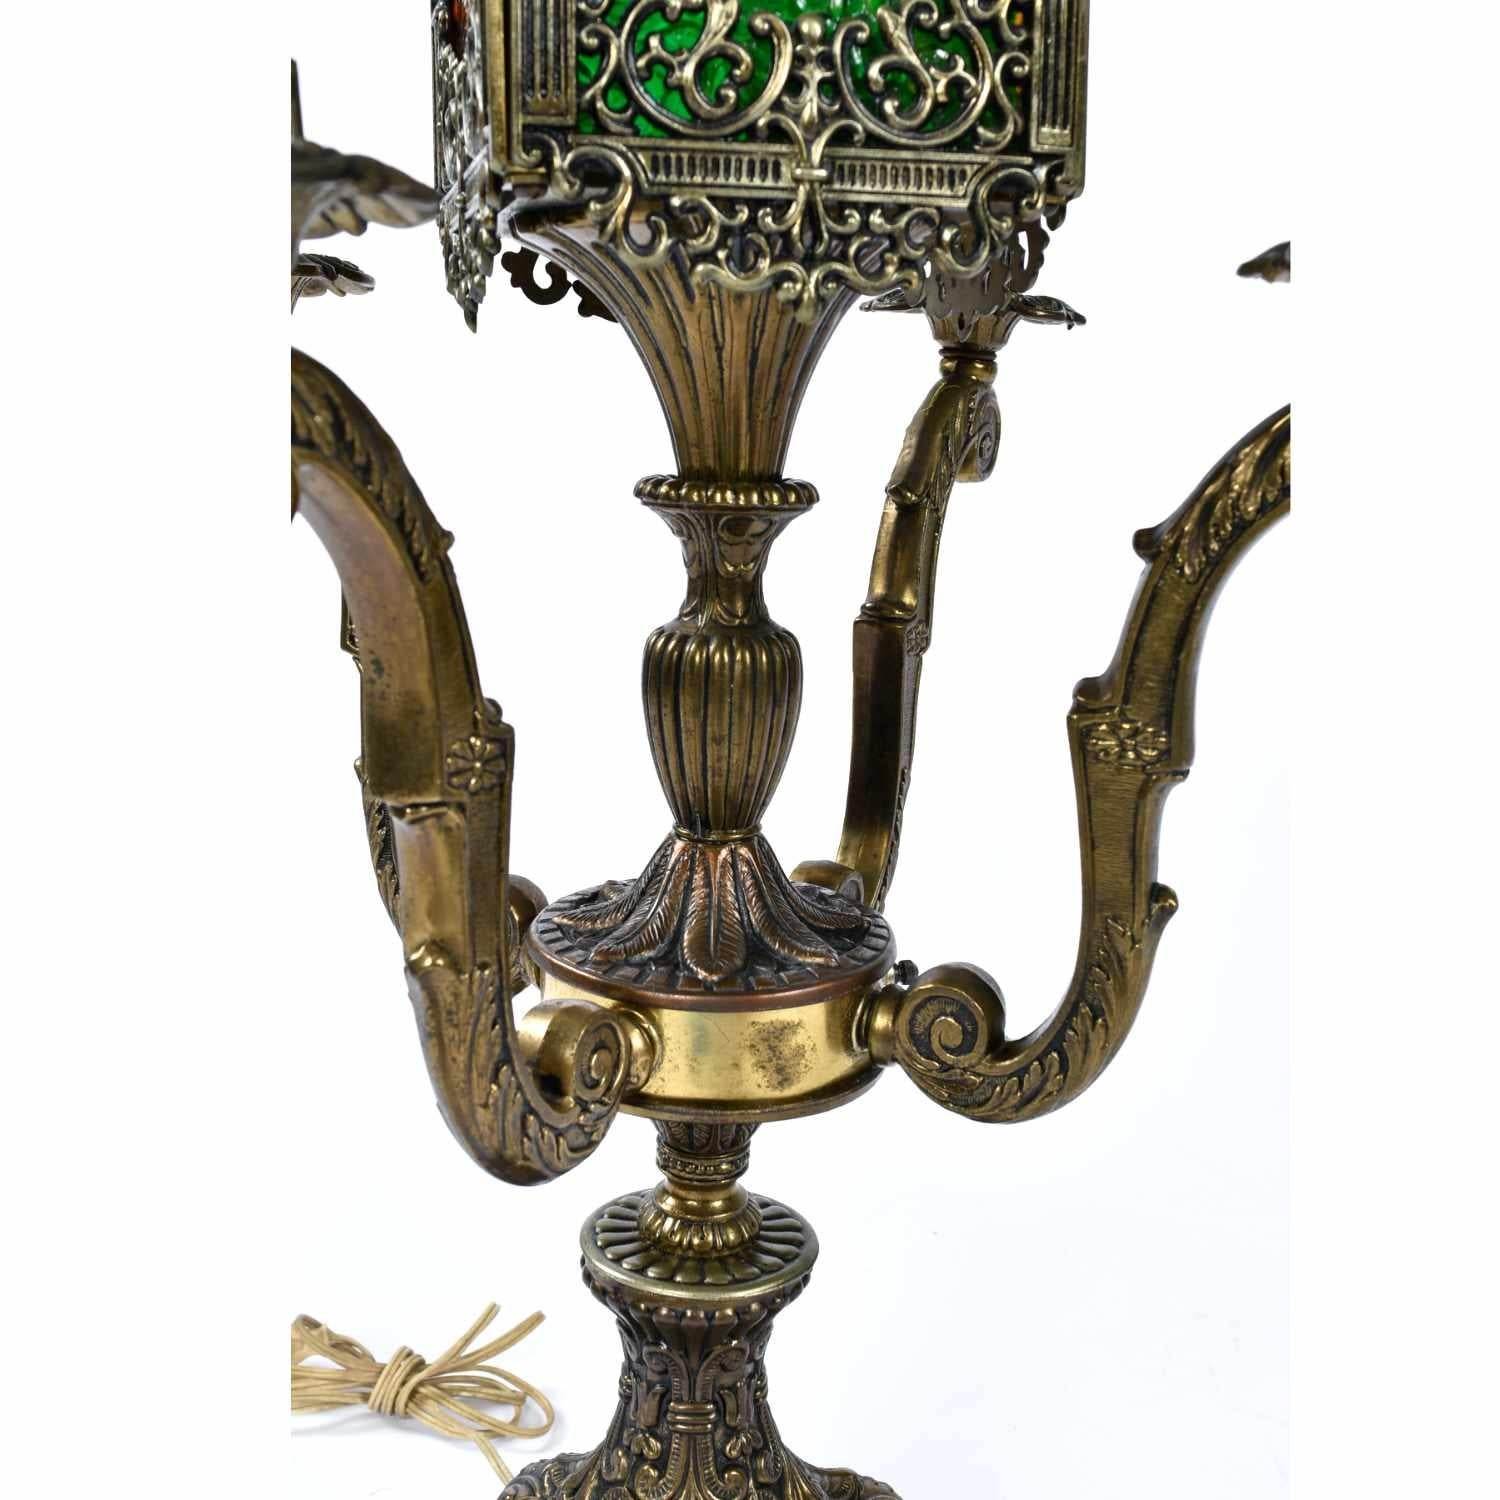 Vintage Gothic Baroque Metal Table Lamp with Orange and Green Stained Glass 2